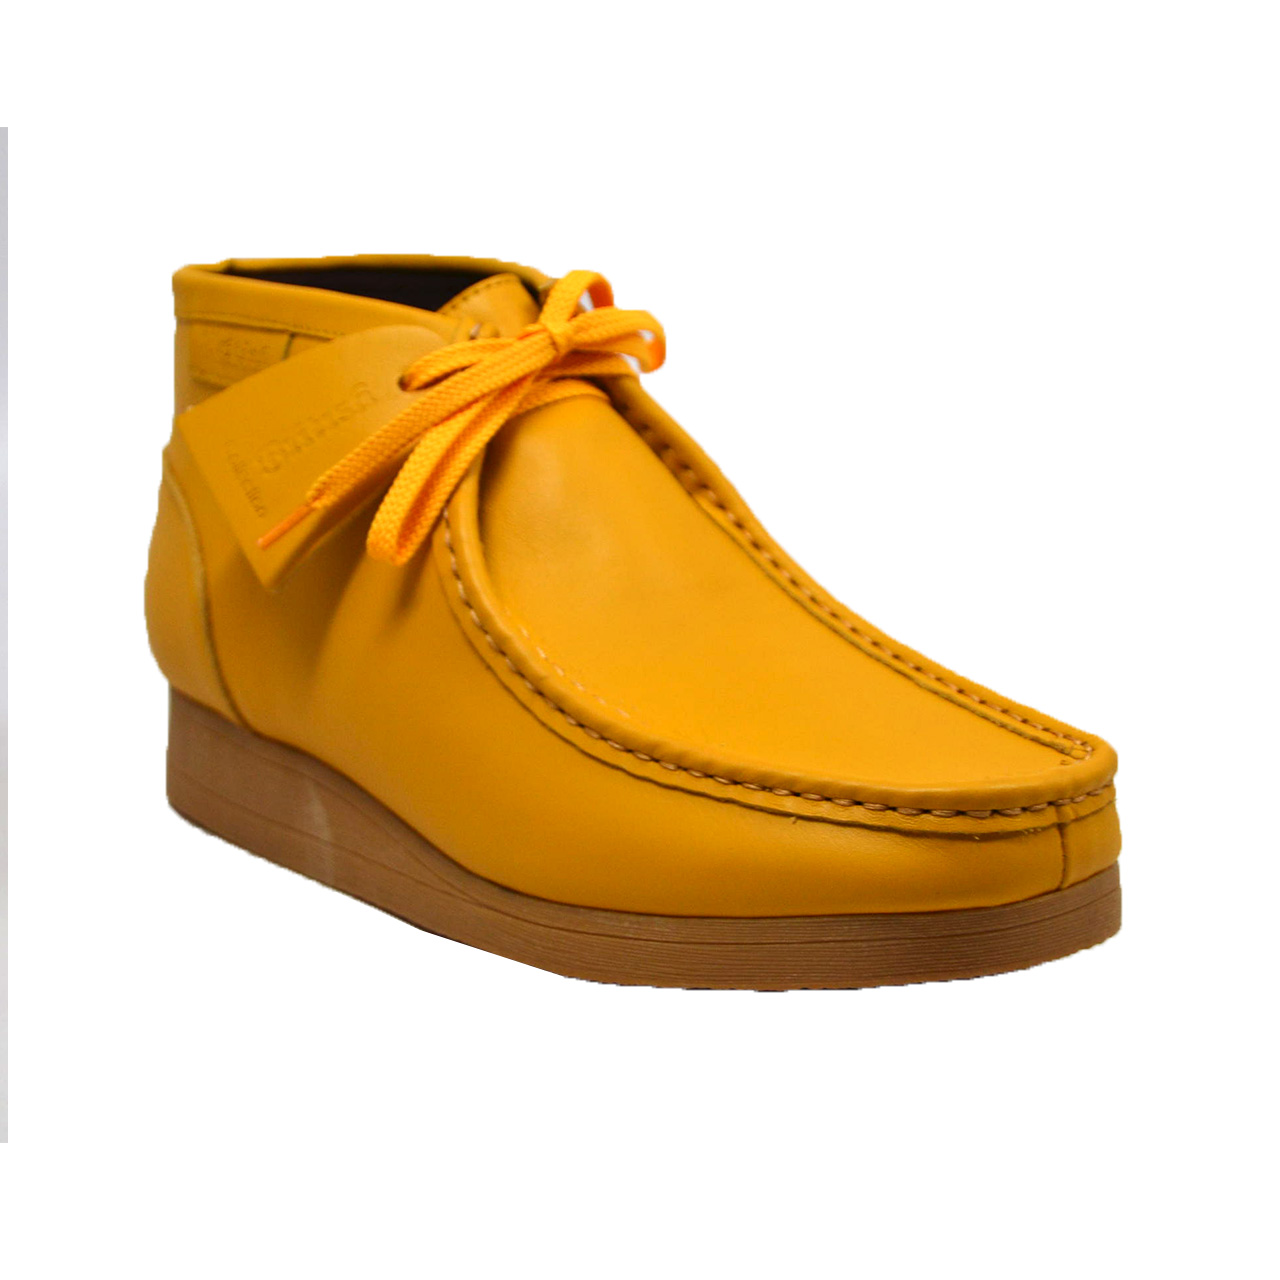 British Collection New Castle 2-yellow Leather [888-4] - $125.00 ...